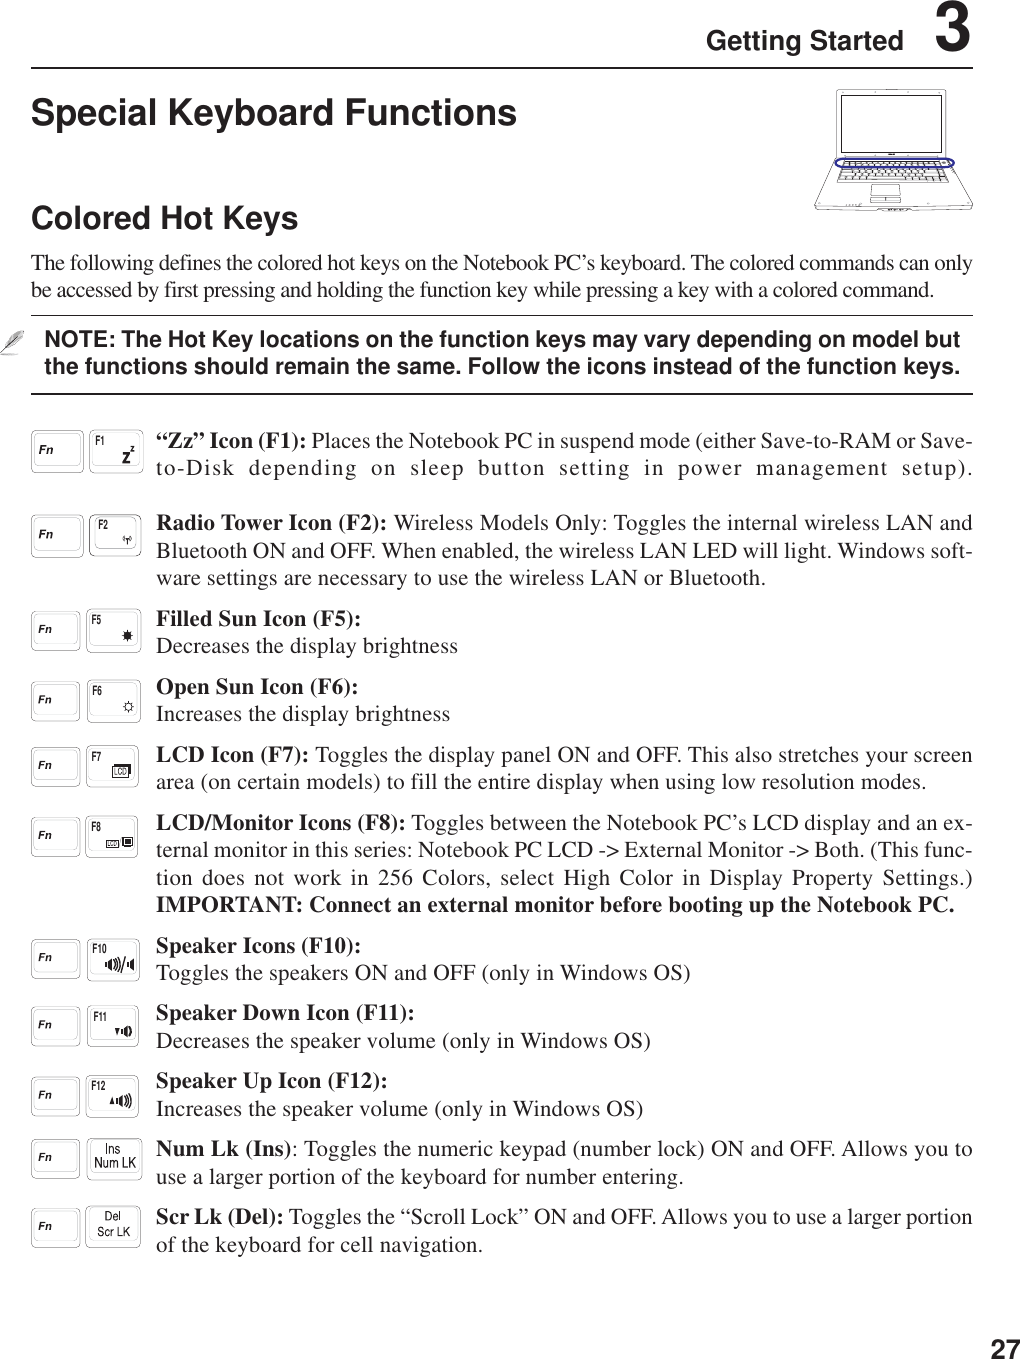 27Getting Started    3Special Keyboard FunctionsColored Hot KeysThe following defines the colored hot keys on the Notebook PC’s keyboard. The colored commands can onlybe accessed by first pressing and holding the function key while pressing a key with a colored command.NOTE: The Hot Key locations on the function keys may vary depending on model butthe functions should remain the same. Follow the icons instead of the function keys.“Zz” Icon (F1): Places the Notebook PC in suspend mode (either Save-to-RAM or Save-to-Disk depending on sleep button setting in power management setup).Radio Tower Icon (F2): Wireless Models Only: Toggles the internal wireless LAN andBluetooth ON and OFF. When enabled, the wireless LAN LED will light. Windows soft-ware settings are necessary to use the wireless LAN or Bluetooth.Filled Sun Icon (F5):Decreases the display brightnessOpen Sun Icon (F6):Increases the display brightnessLCD Icon (F7): Toggles the display panel ON and OFF. This also stretches your screenarea (on certain models) to fill the entire display when using low resolution modes.LCD/Monitor Icons (F8): Toggles between the Notebook PC’s LCD display and an ex-ternal monitor in this series: Notebook PC LCD -&gt; External Monitor -&gt; Both. (This func-tion does not work in 256 Colors, select High Color in Display Property Settings.)IMPORTANT: Connect an external monitor before booting up the Notebook PC.Speaker Icons (F10):Toggles the speakers ON and OFF (only in Windows OS)Speaker Down Icon (F11):Decreases the speaker volume (only in Windows OS)Speaker Up Icon (F12):Increases the speaker volume (only in Windows OS)Num Lk (Ins): Toggles the numeric keypad (number lock) ON and OFF. Allows you touse a larger portion of the keyboard for number entering.Scr Lk (Del): Toggles the “Scroll Lock” ON and OFF. Allows you to use a larger portionof the keyboard for cell navigation.F10F7F1F12F8F5F11F6F2